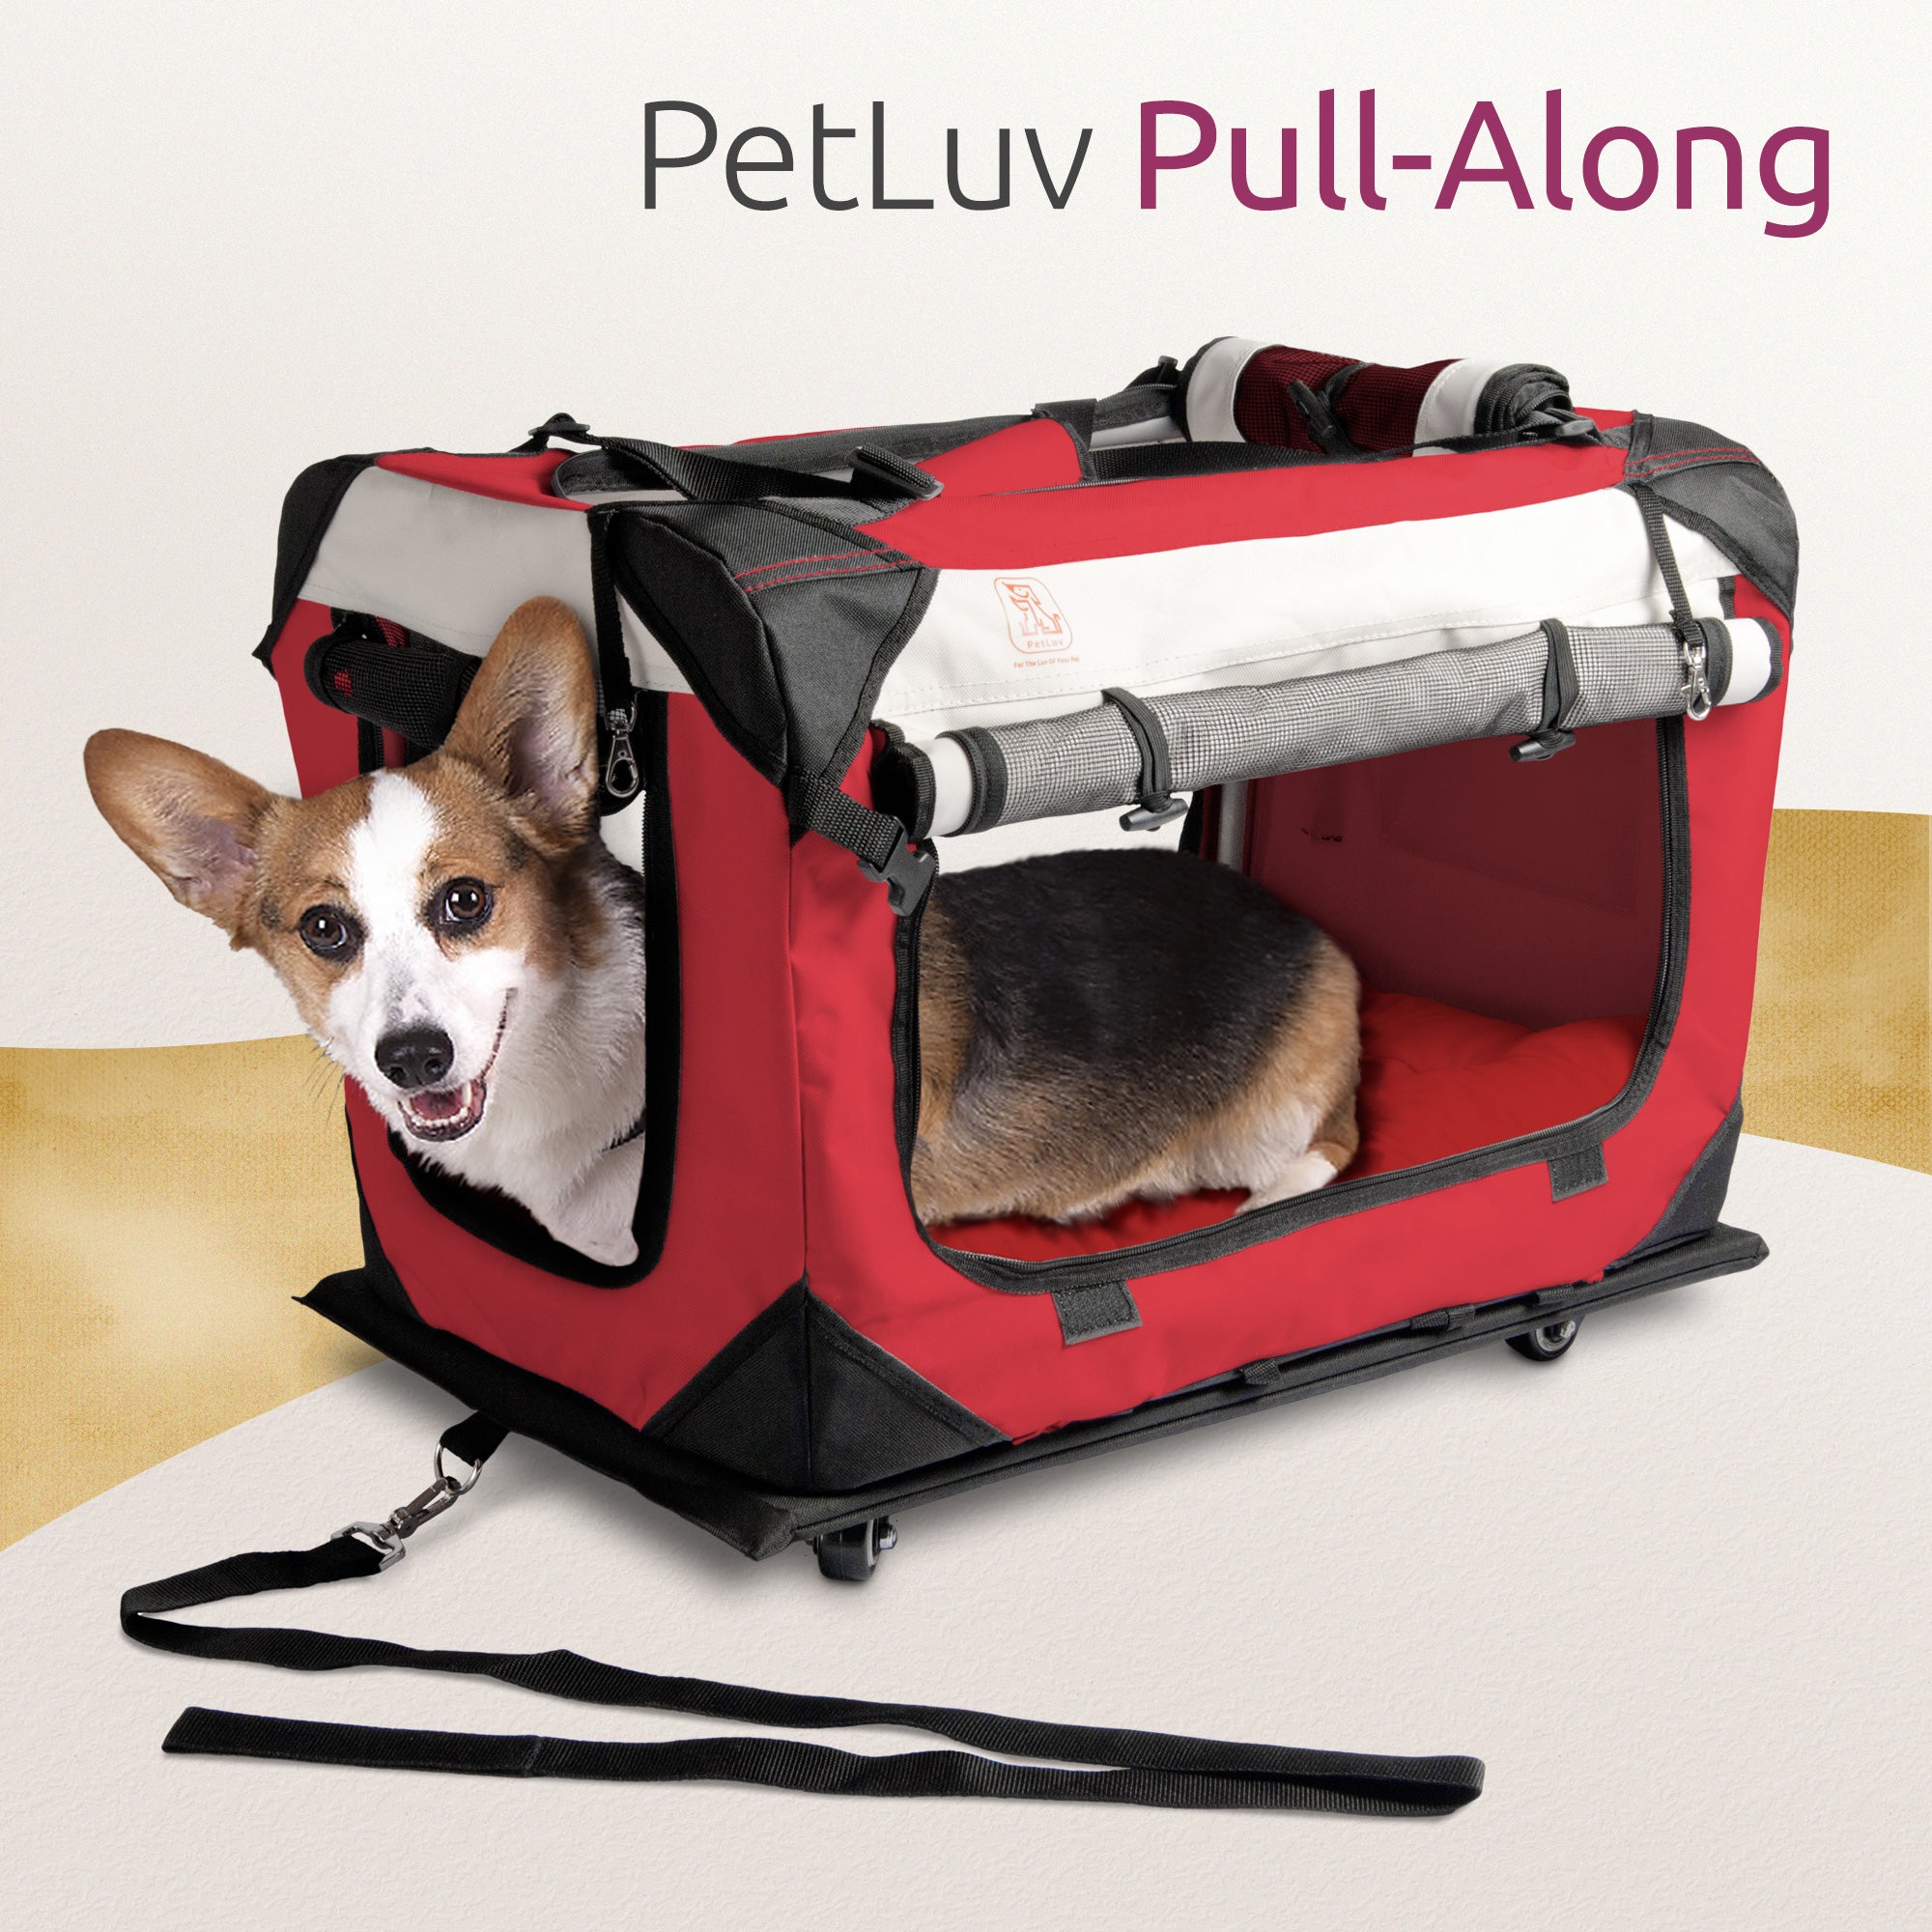 Pull-Along Rolling Cat & Dog Carriers